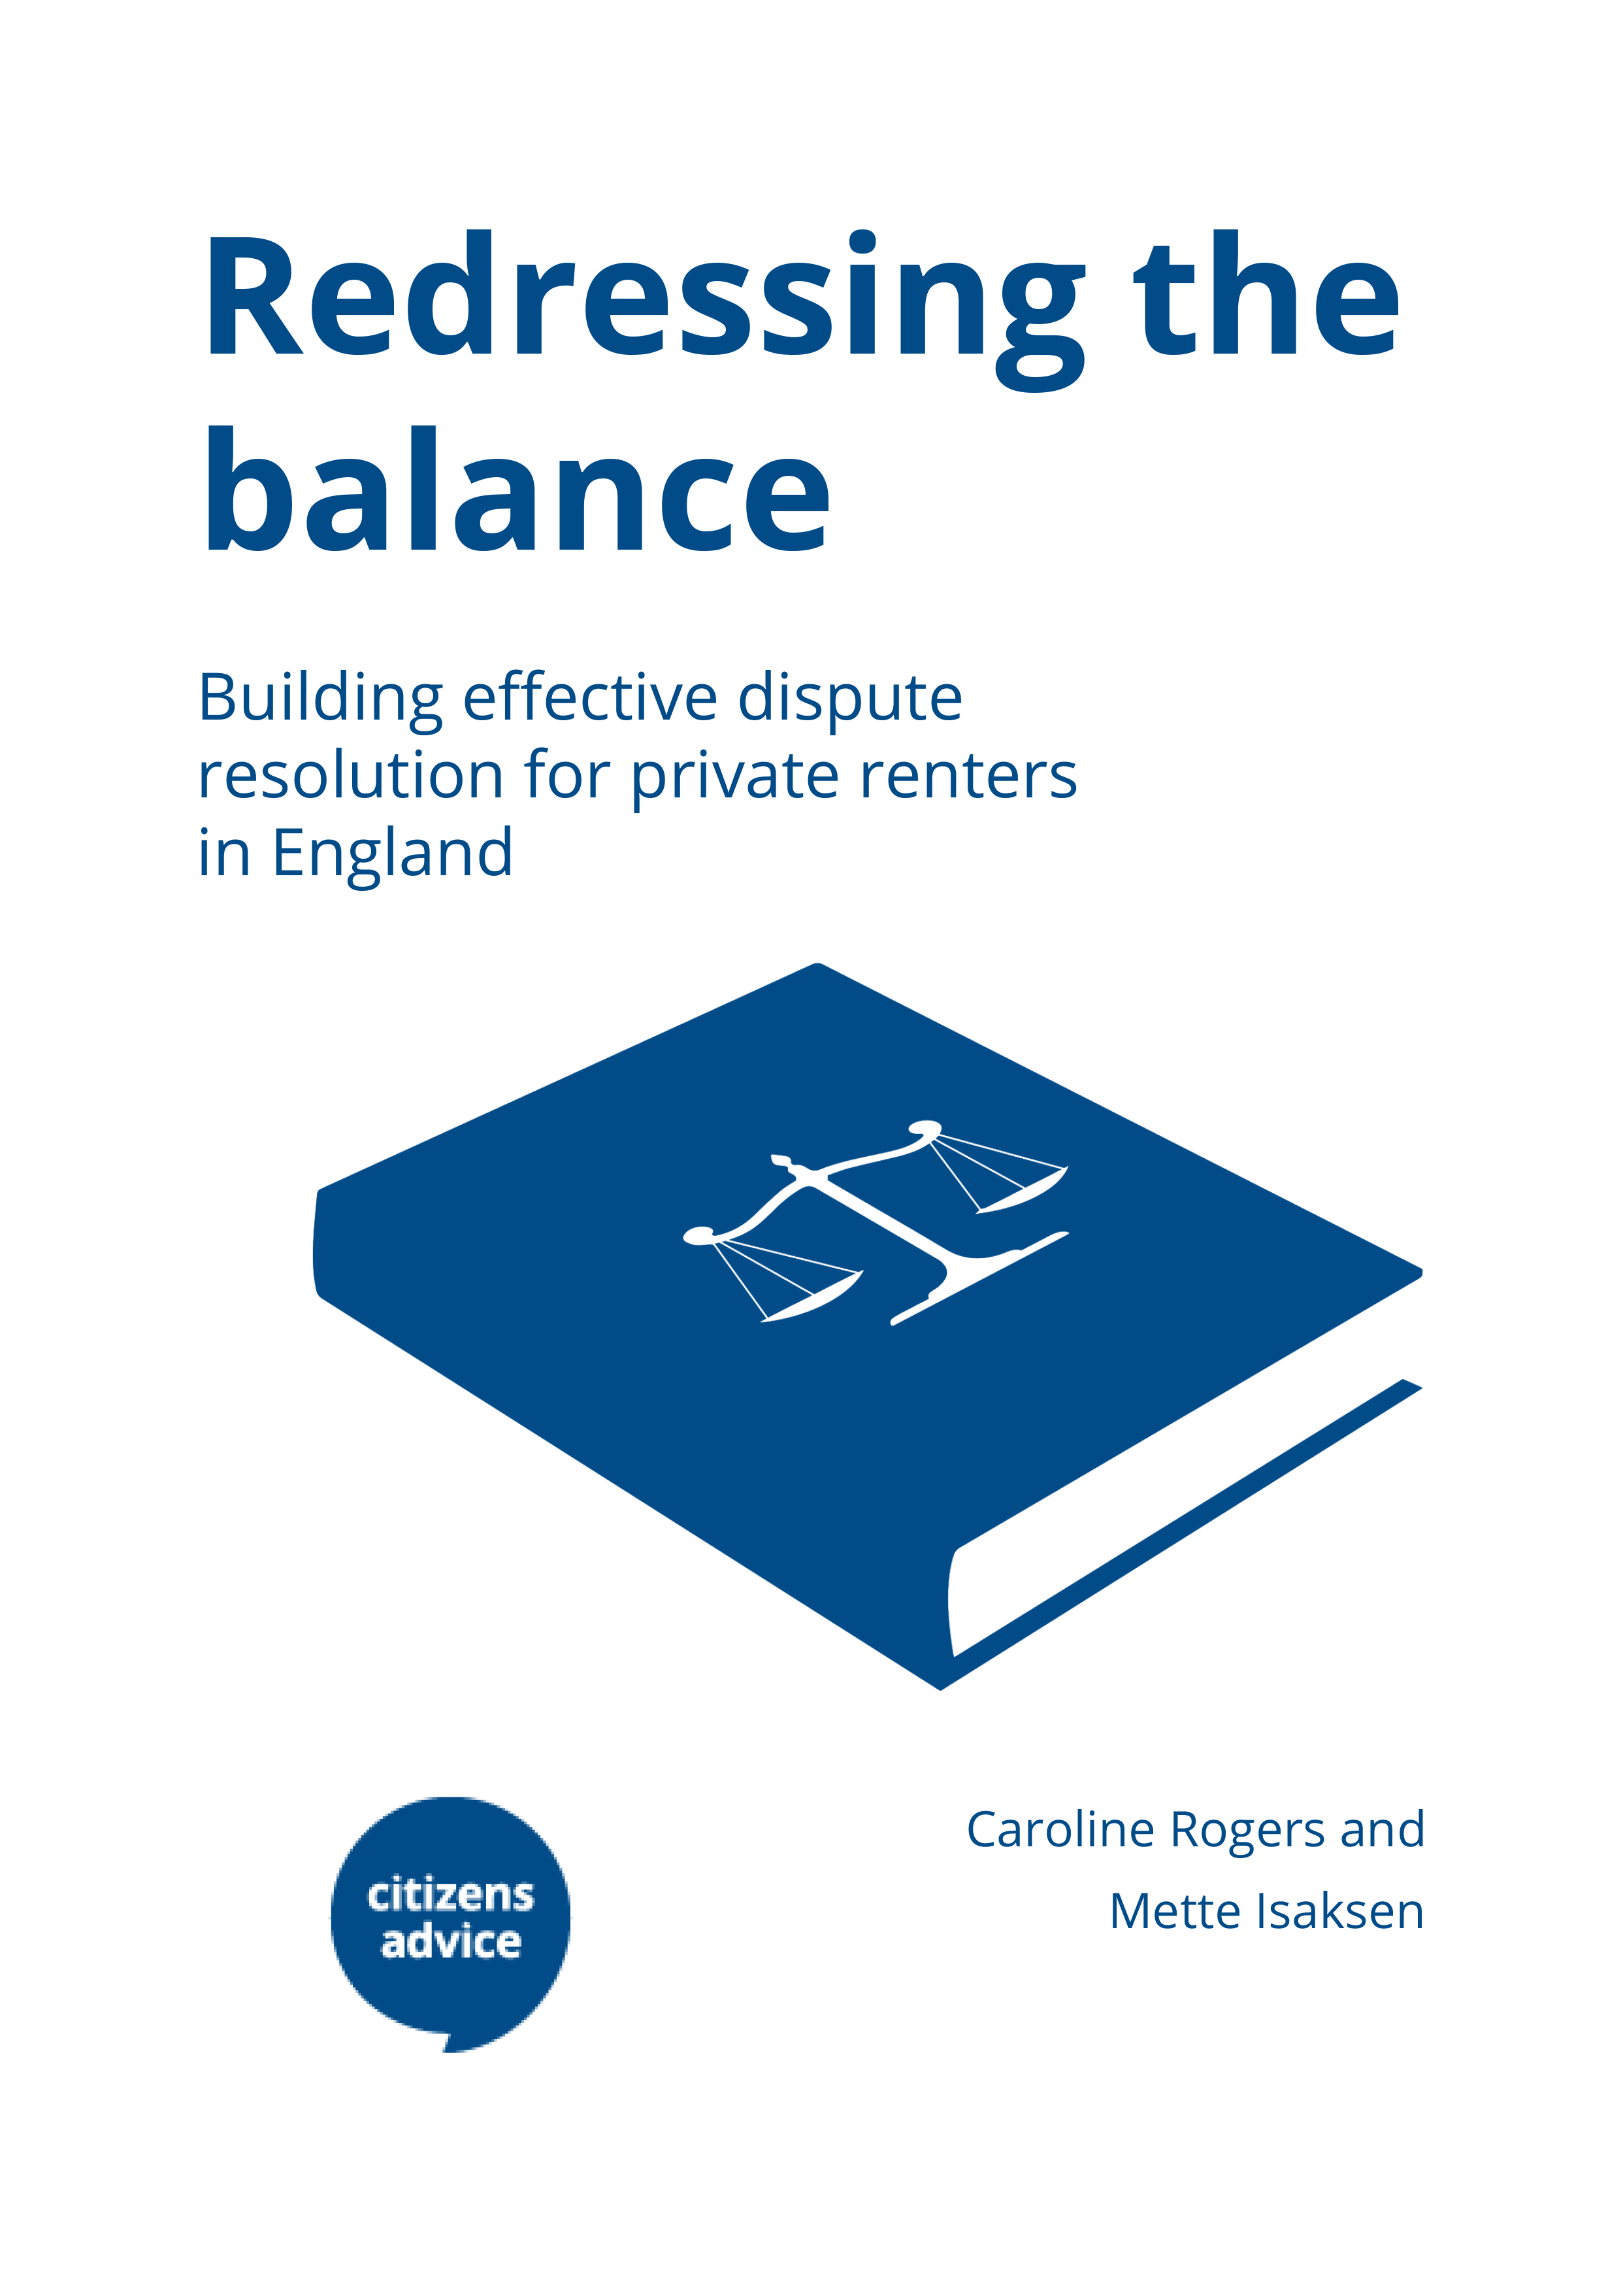 Redressing the balance report cover